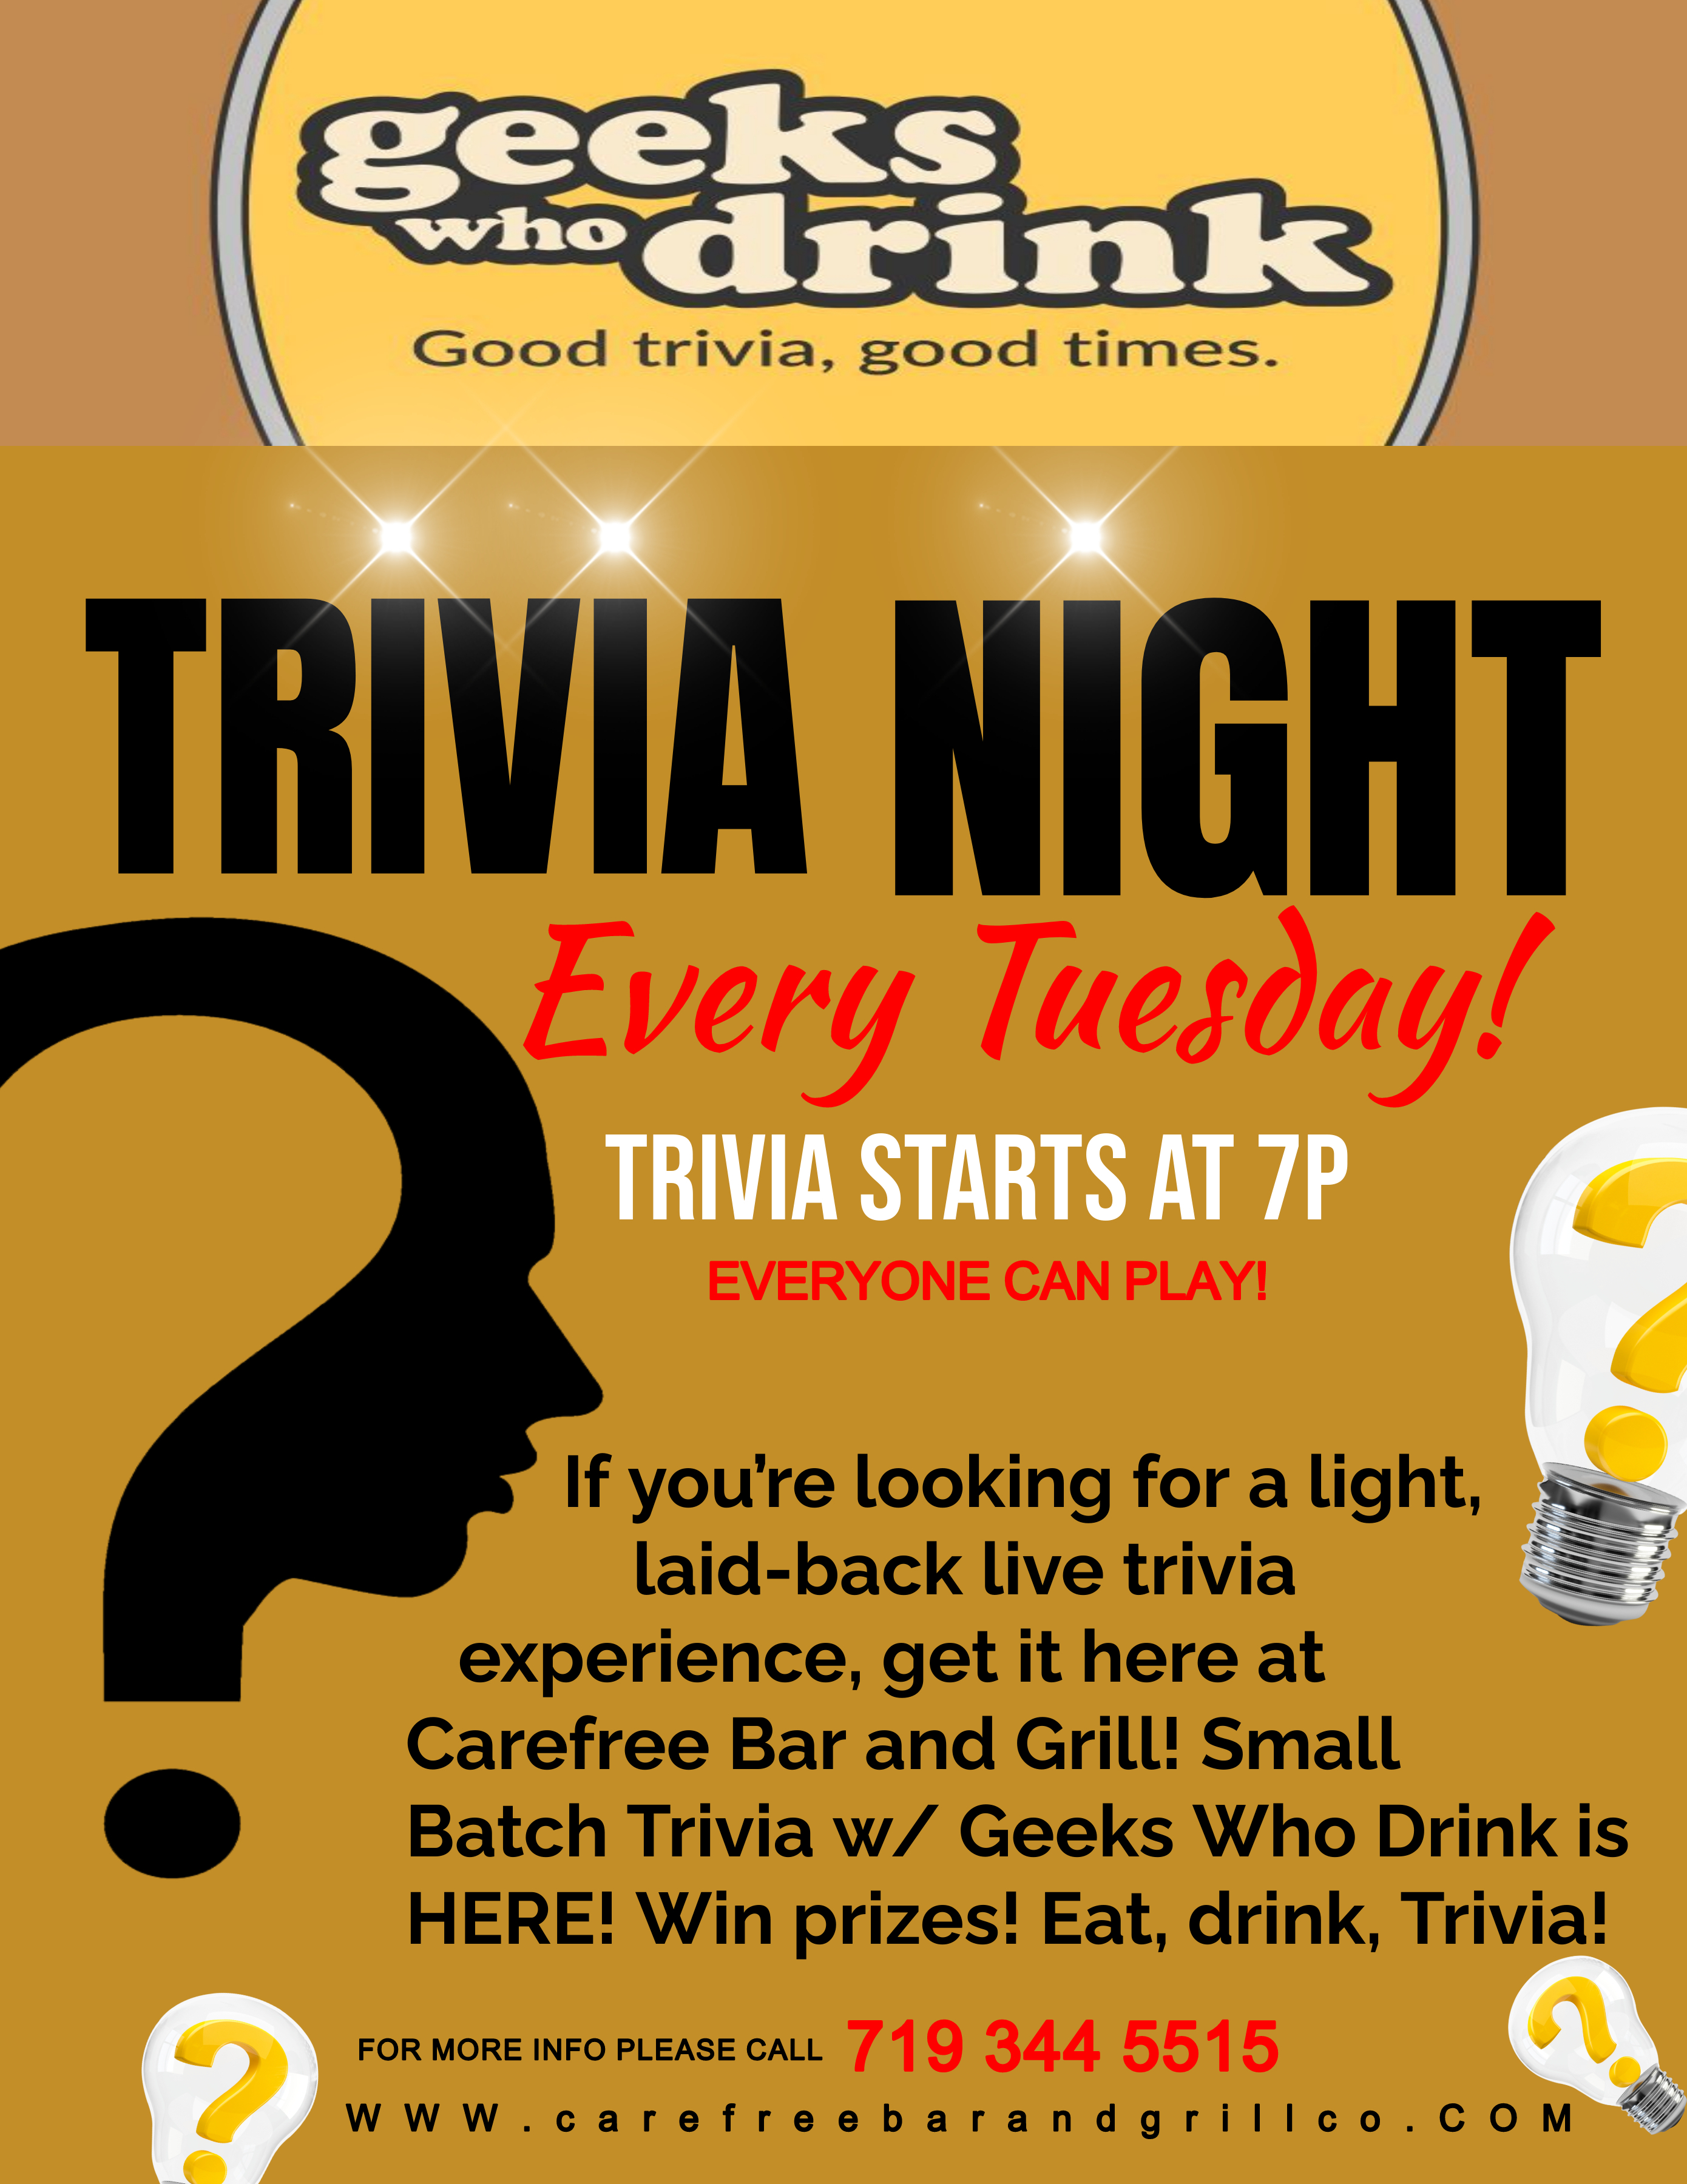 Trivia Night at Carefree Bar & Grill in Colorado Springs, CO